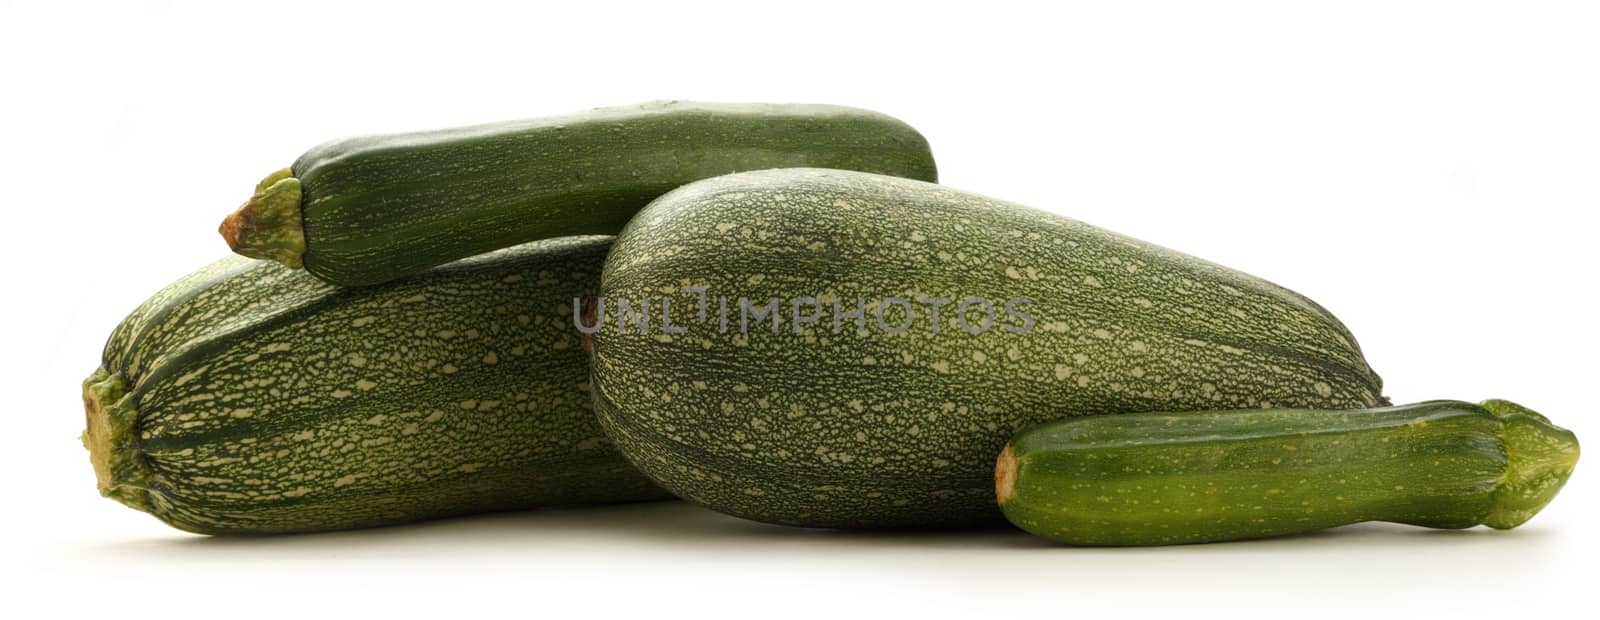 Green marrows on white background